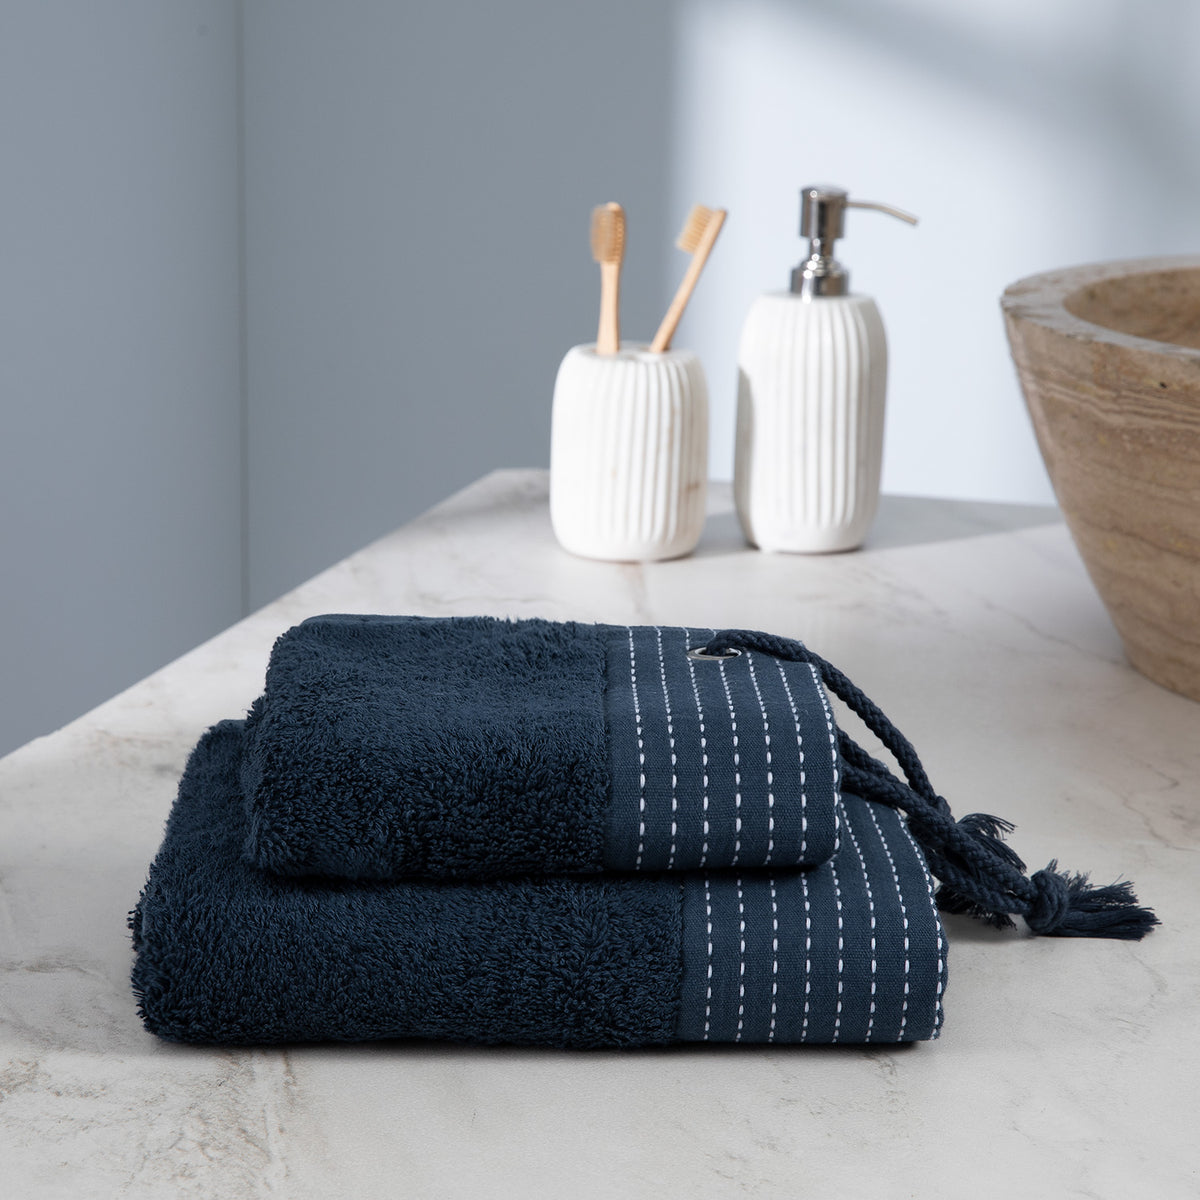 Turkish Terry Towel with Stylish Rope as a loop, navy, for Boat or Bath, ultra soft, very absorbent, easy to hang